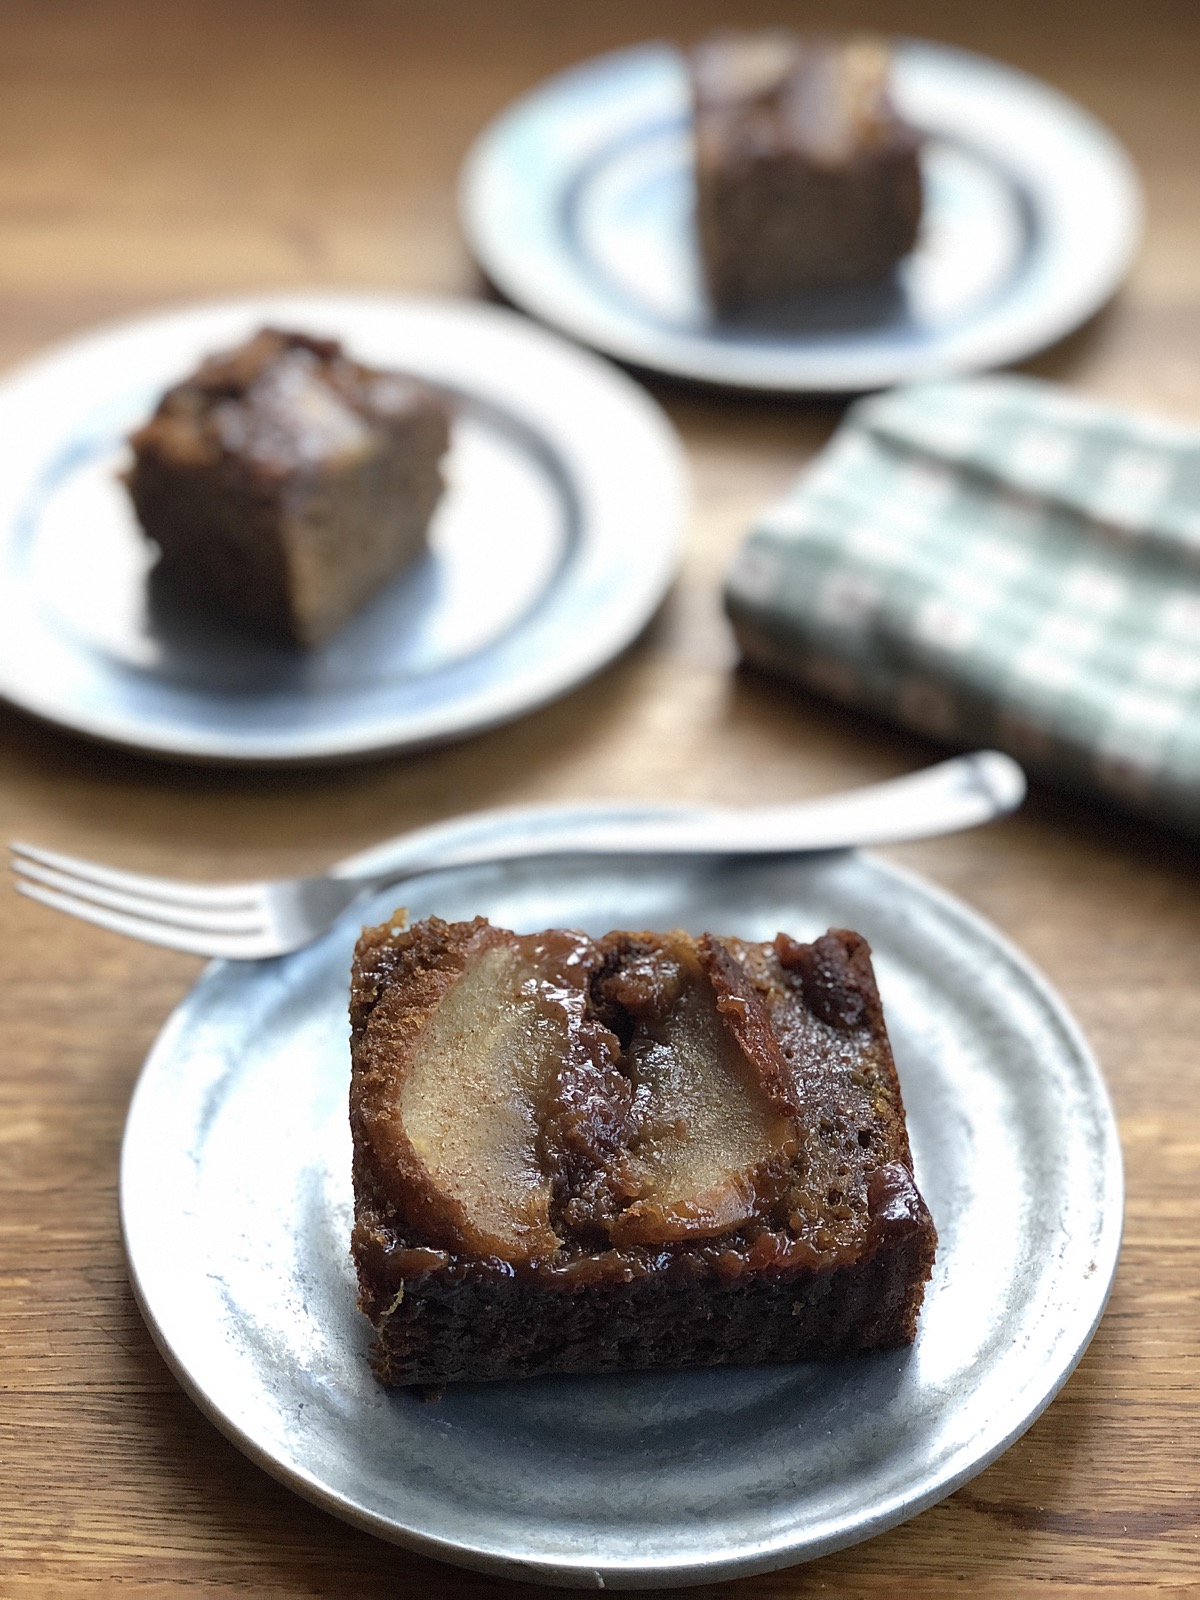 Square of apple upside-down gingerbread cake on a plate